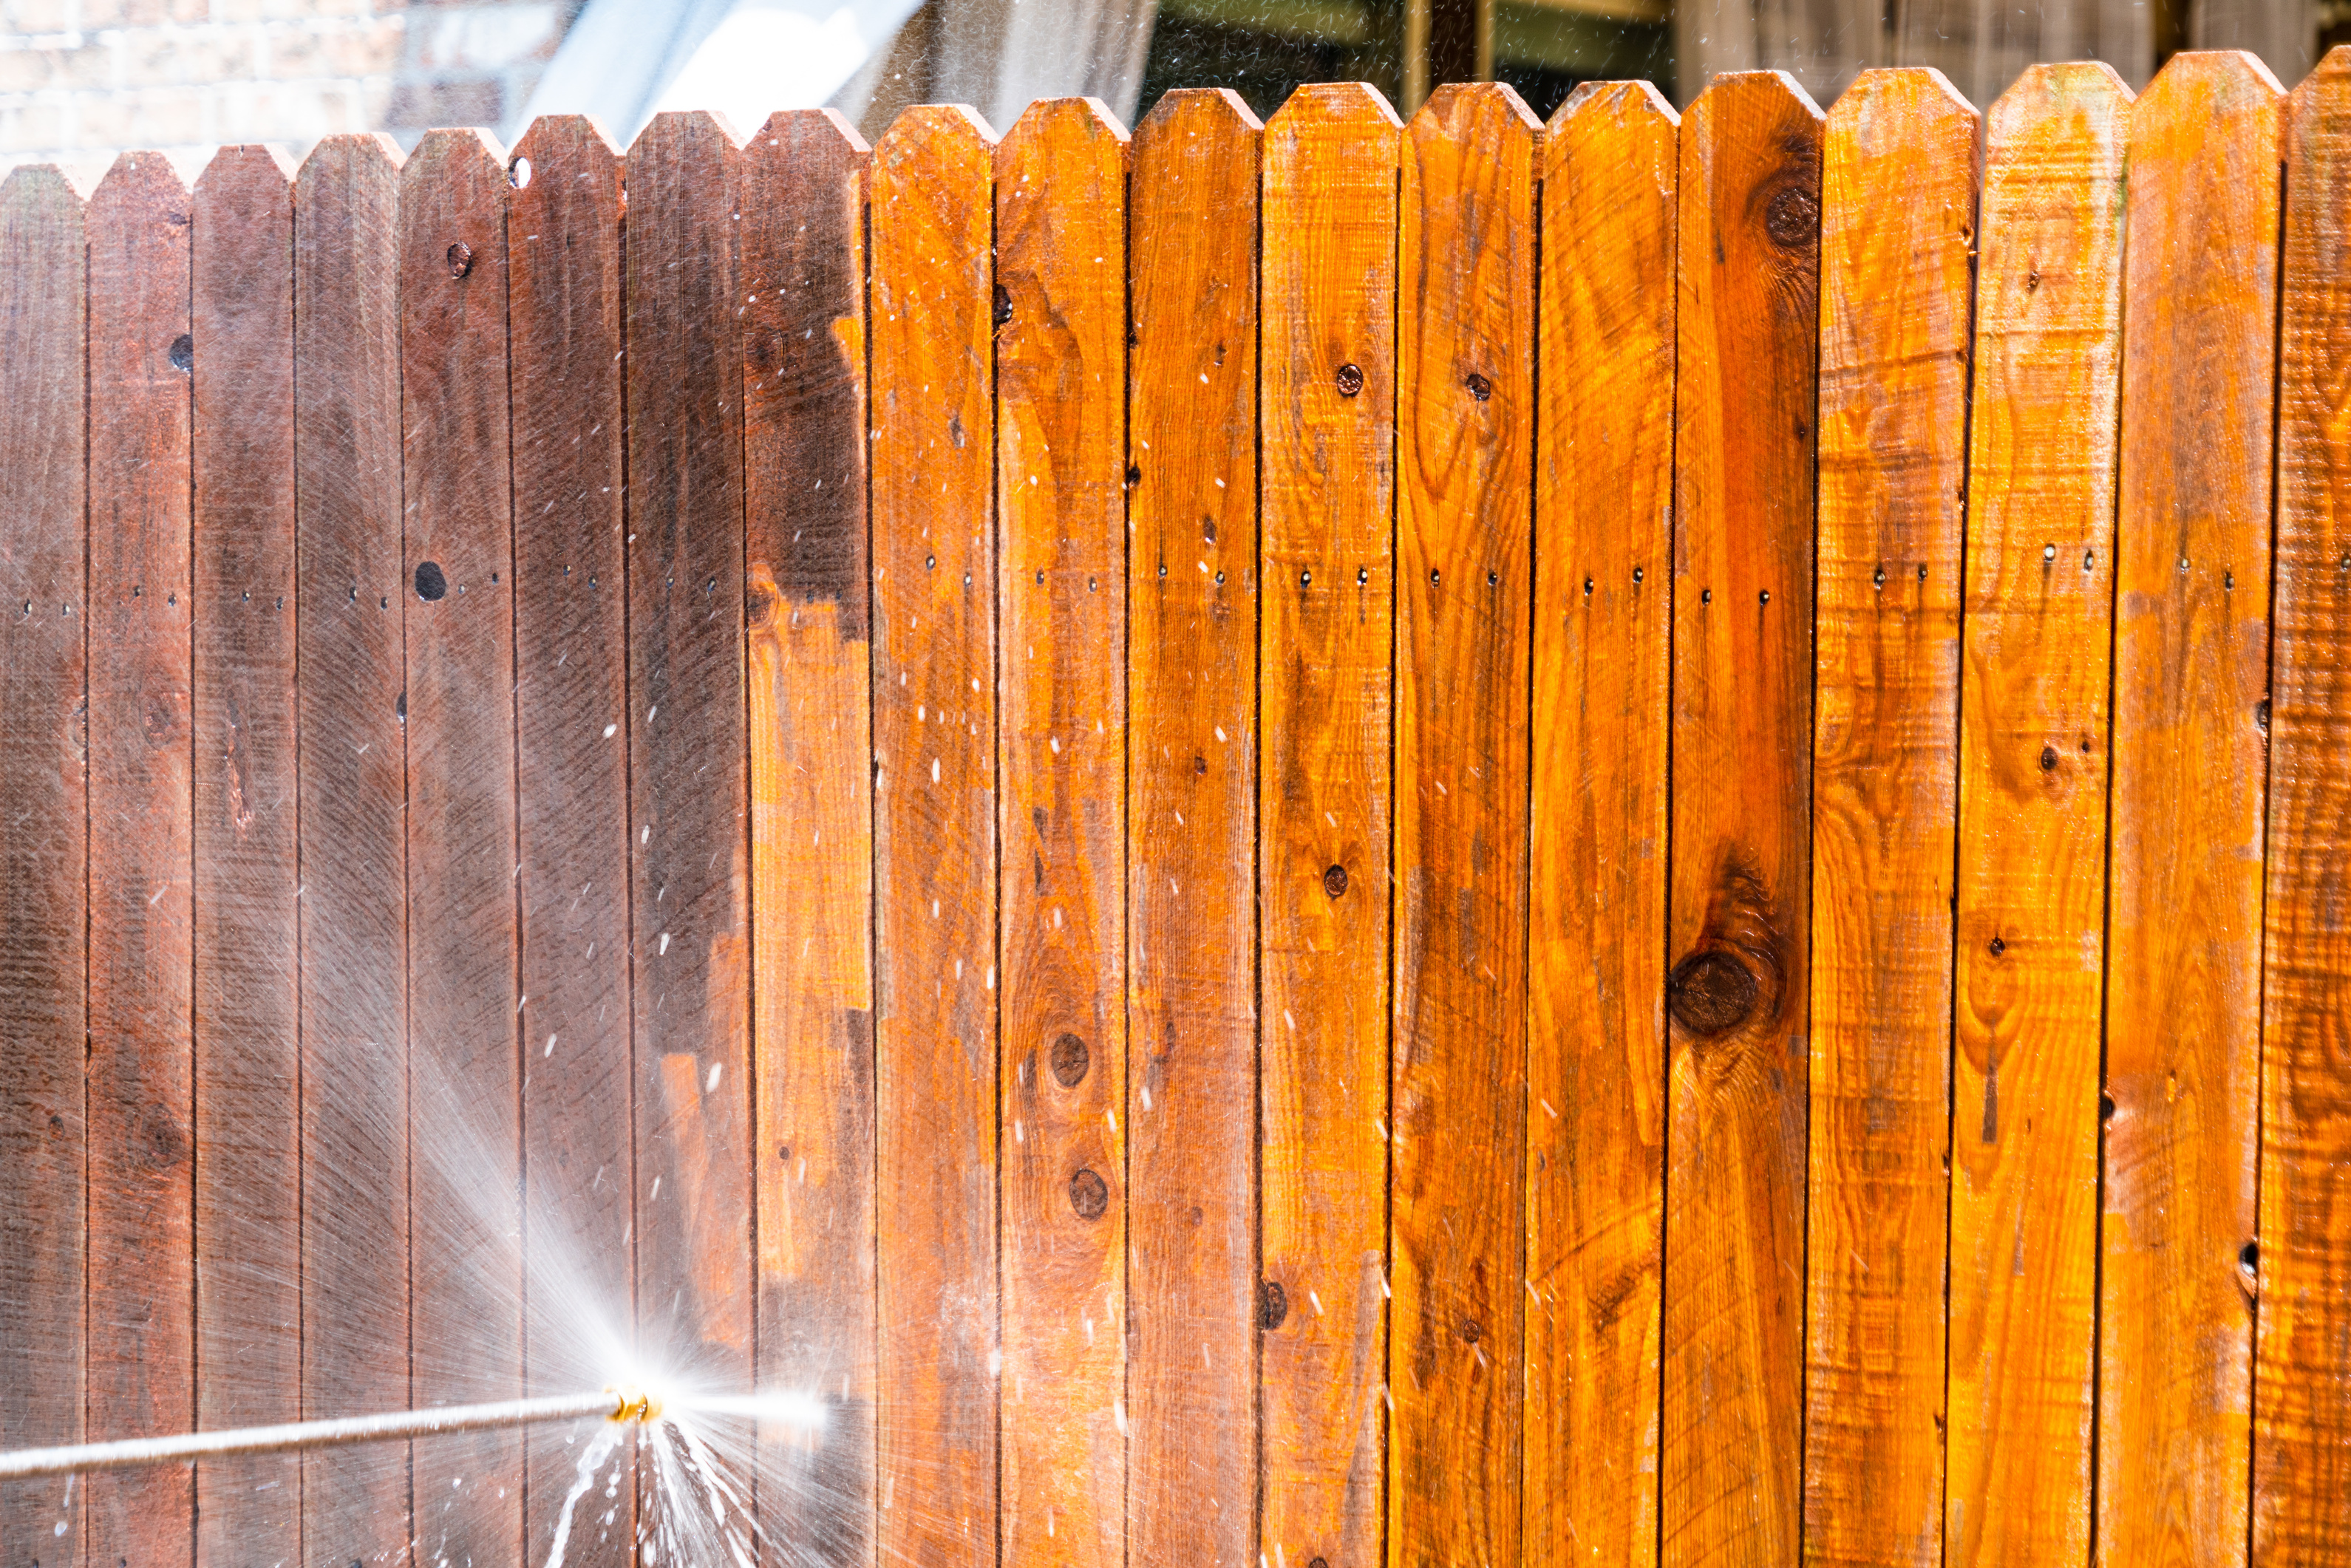 Pressure Washing Fence Cleaning surfaces